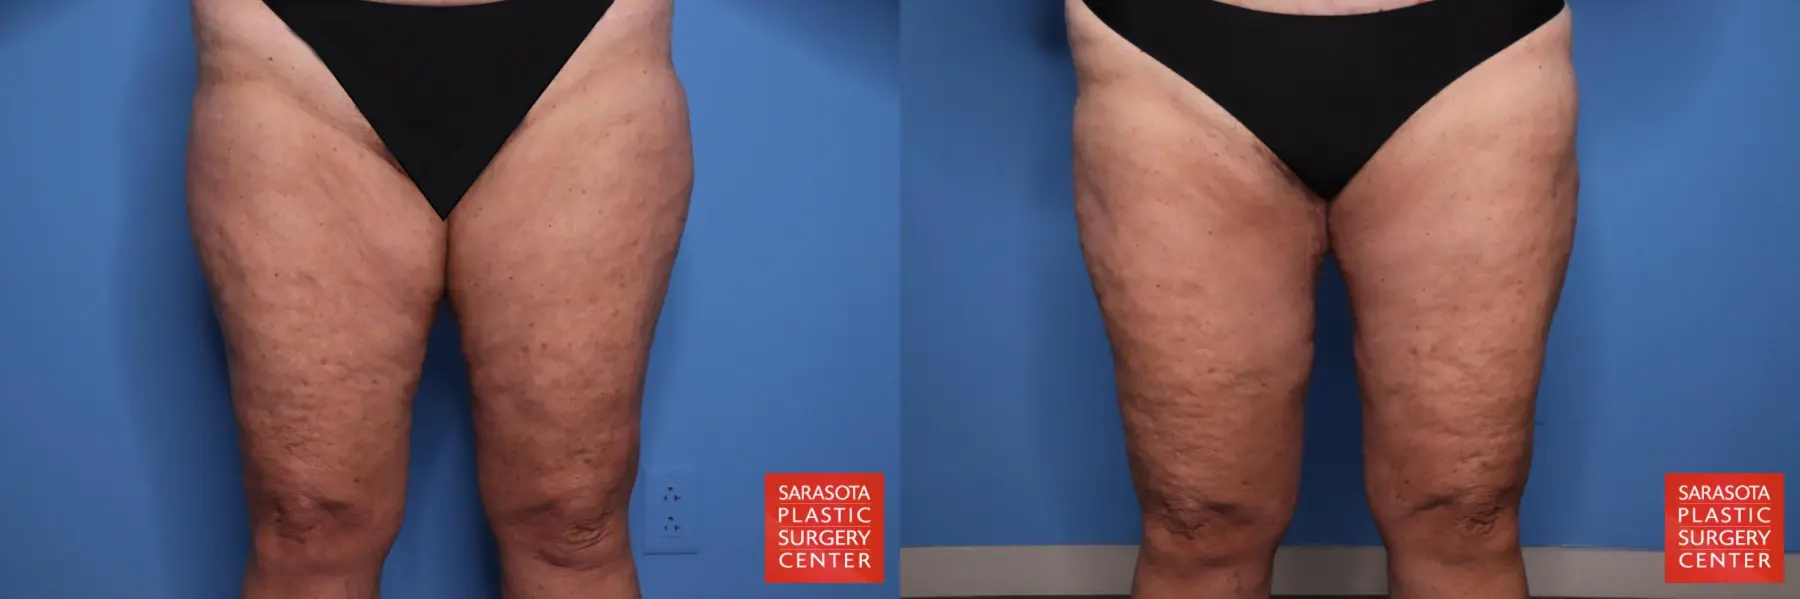 Thigh Lift: Patient 4 - Before and After  